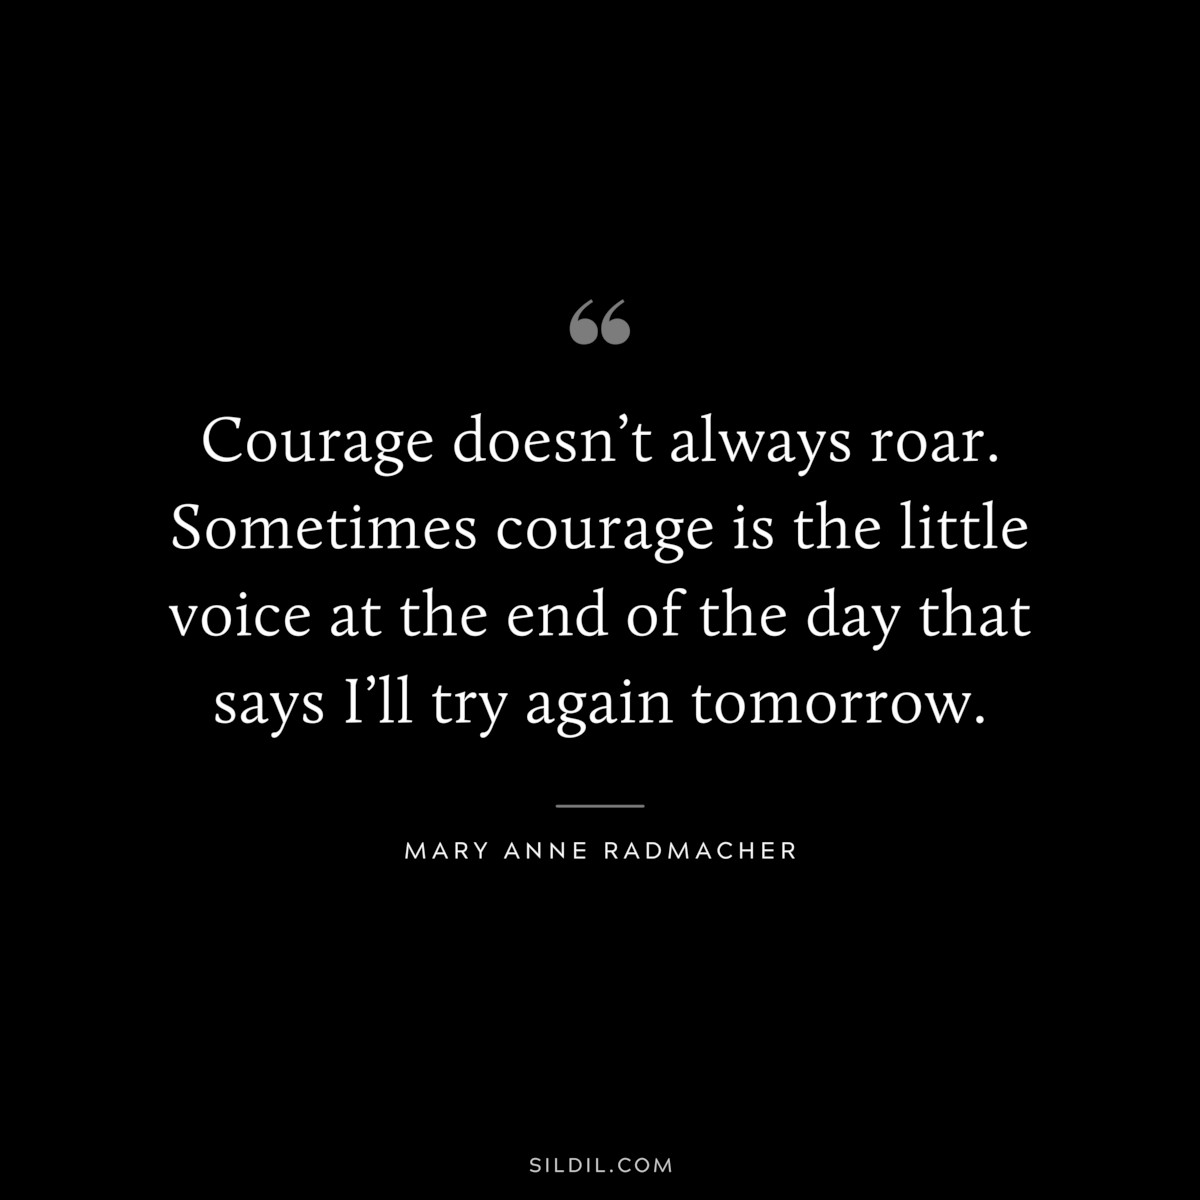 Courage doesn’t always roar. Sometimes courage is the little voice at the end of the day that says I’ll try again tomorrow. ― Mary Anne Radmacher